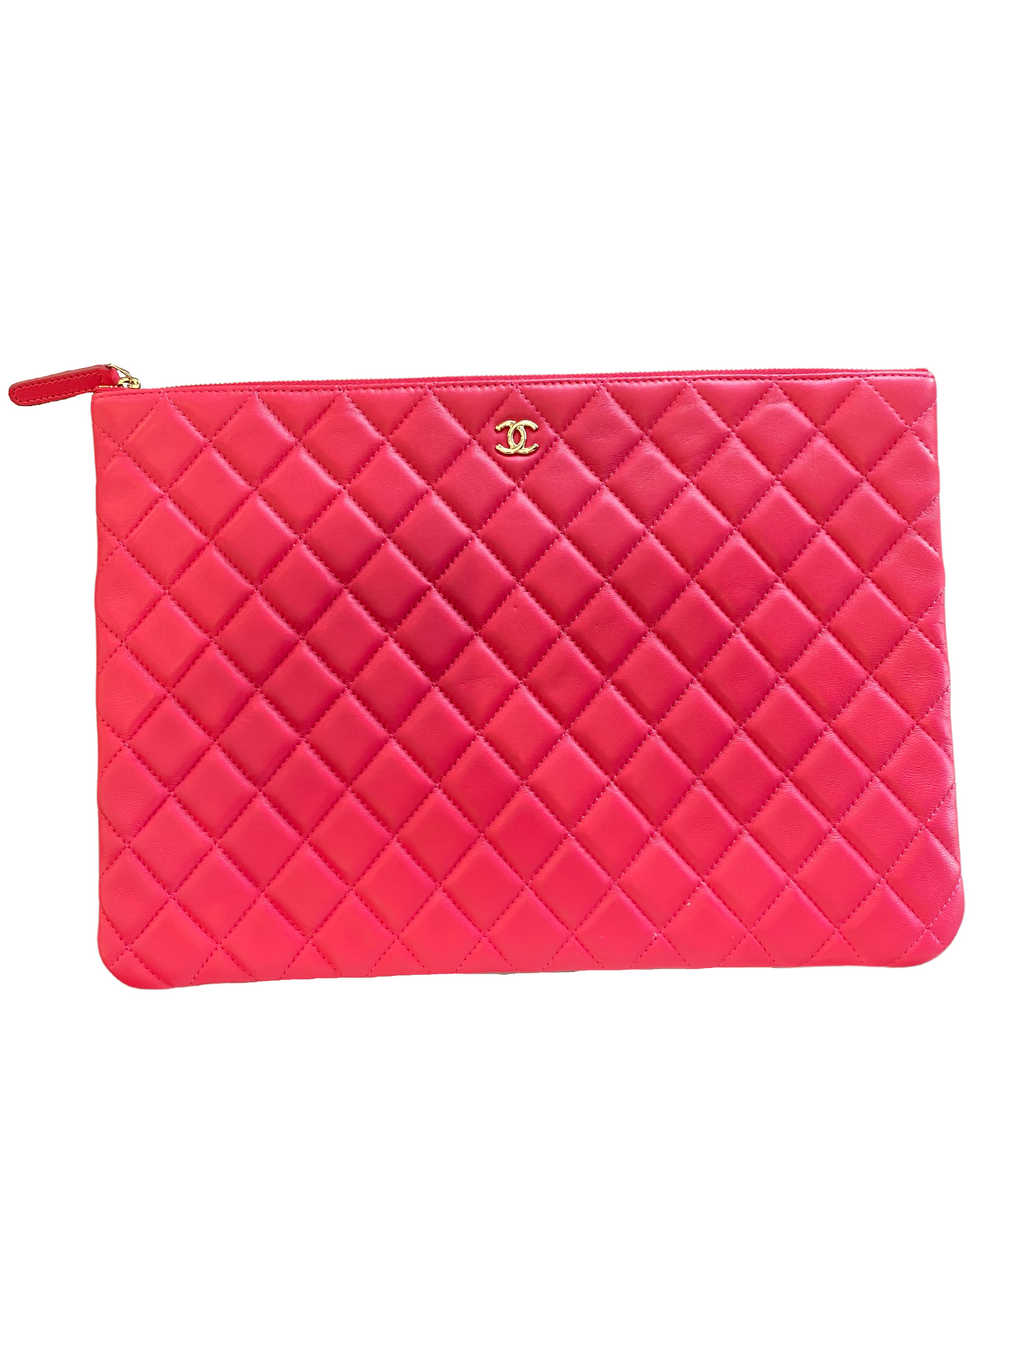 Chanel Quilted Laptop Case